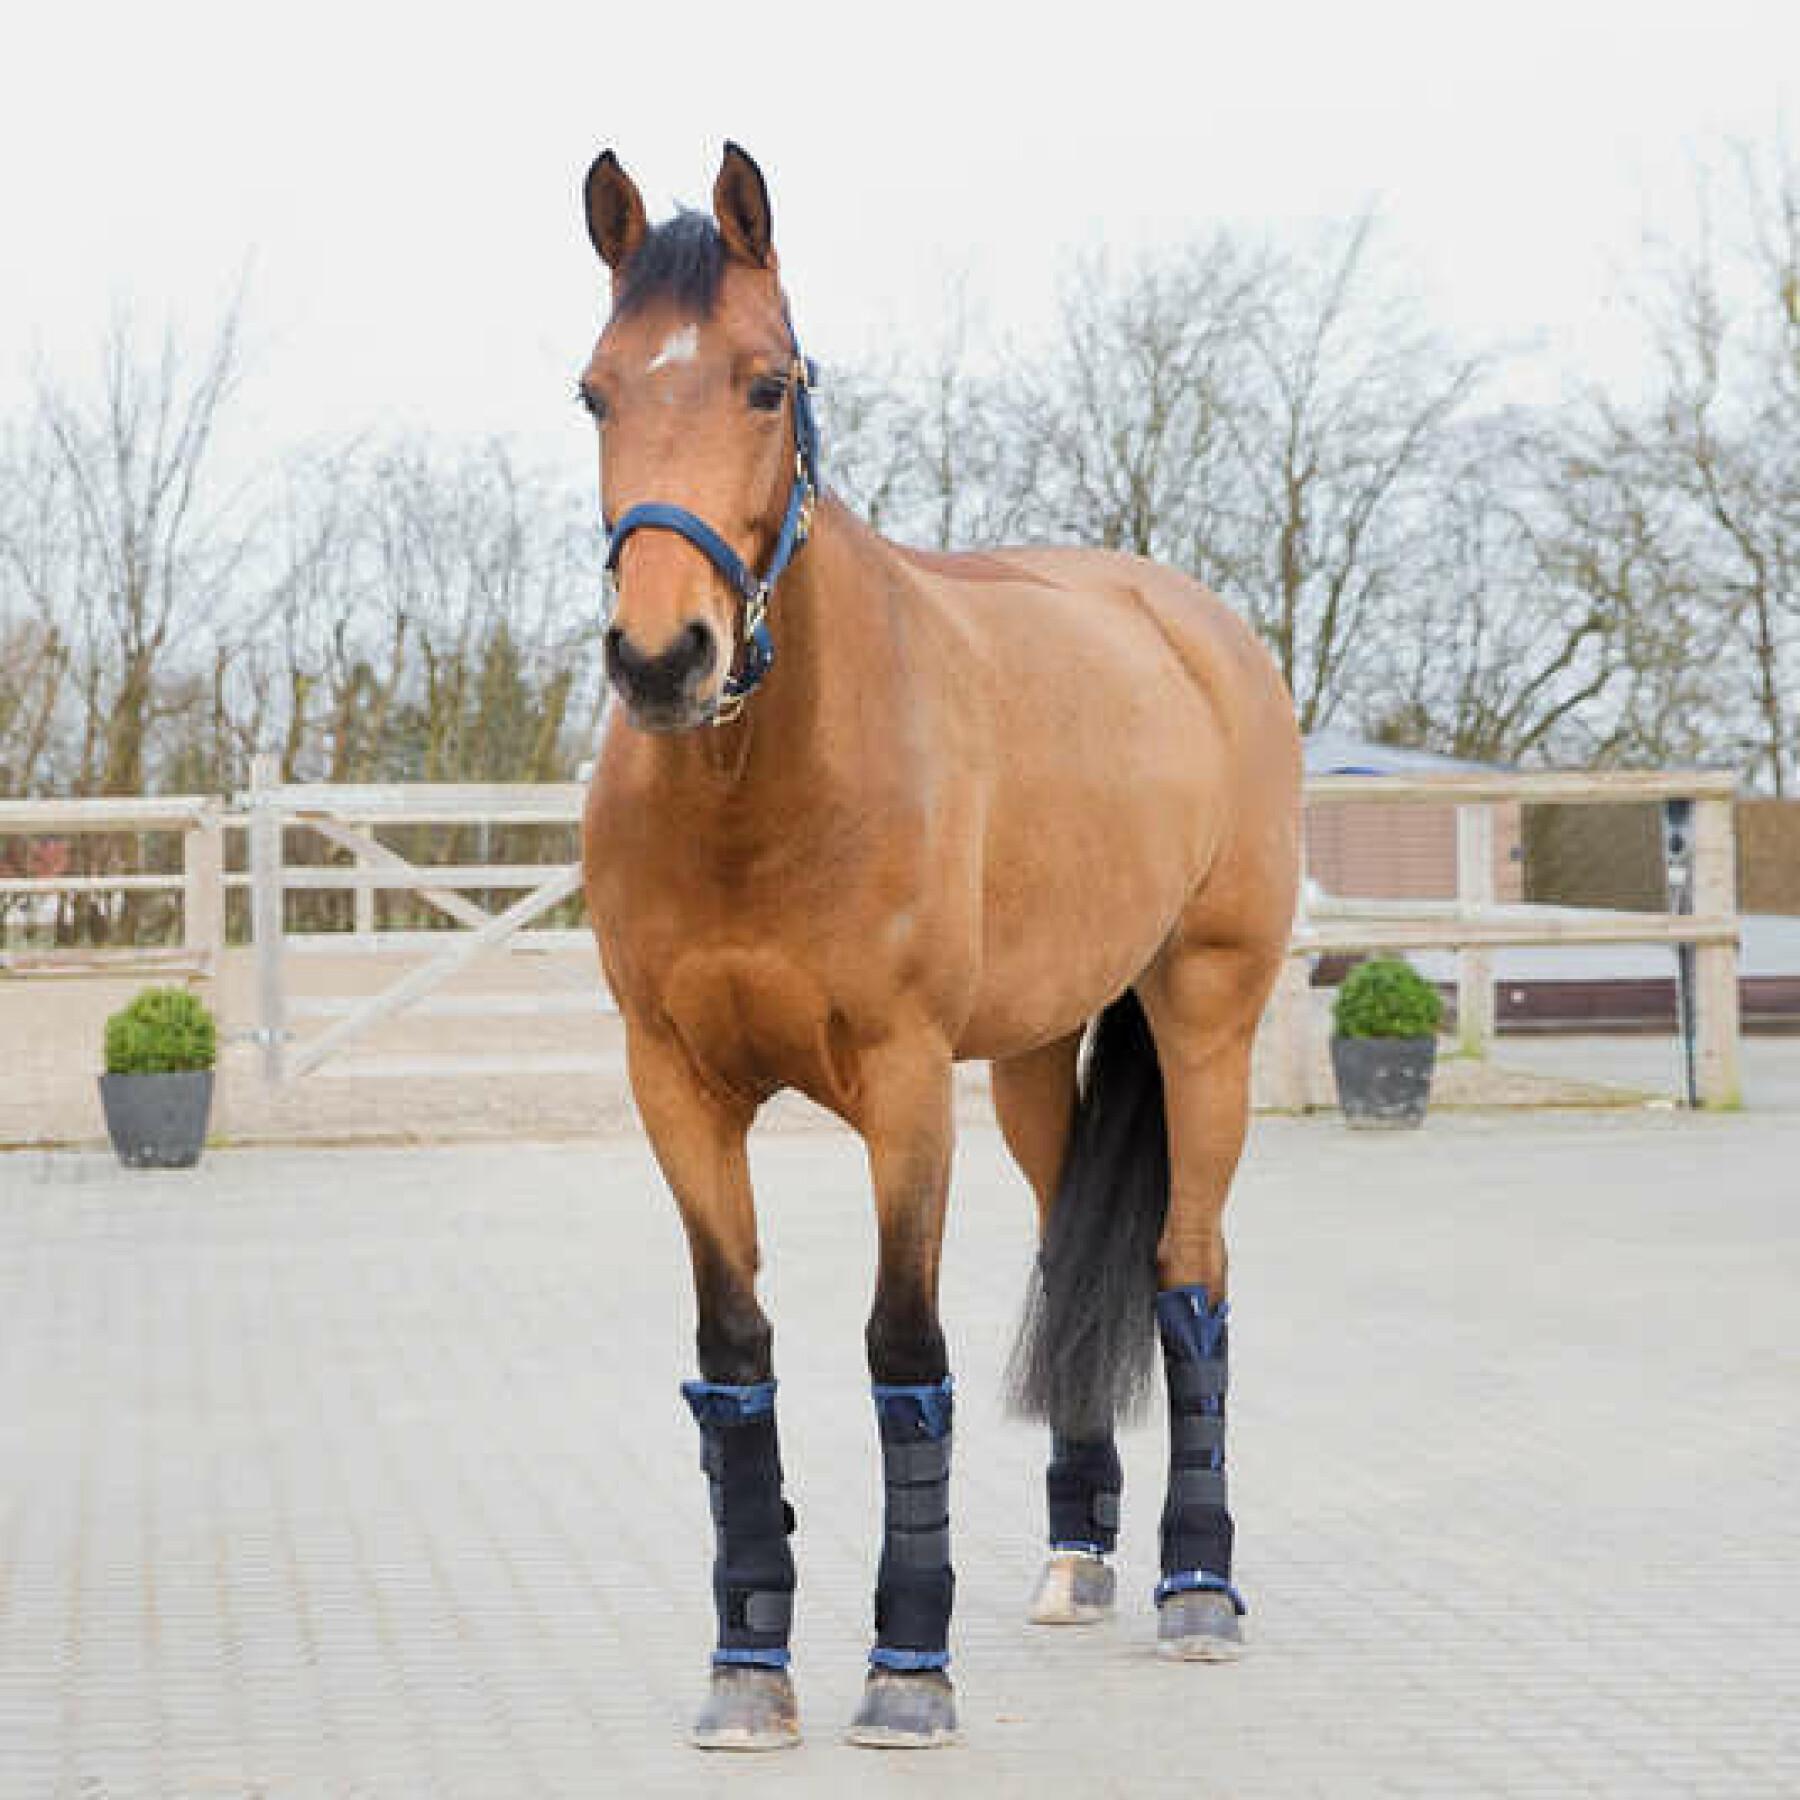 Front stable gaiters for horses Horze Pro